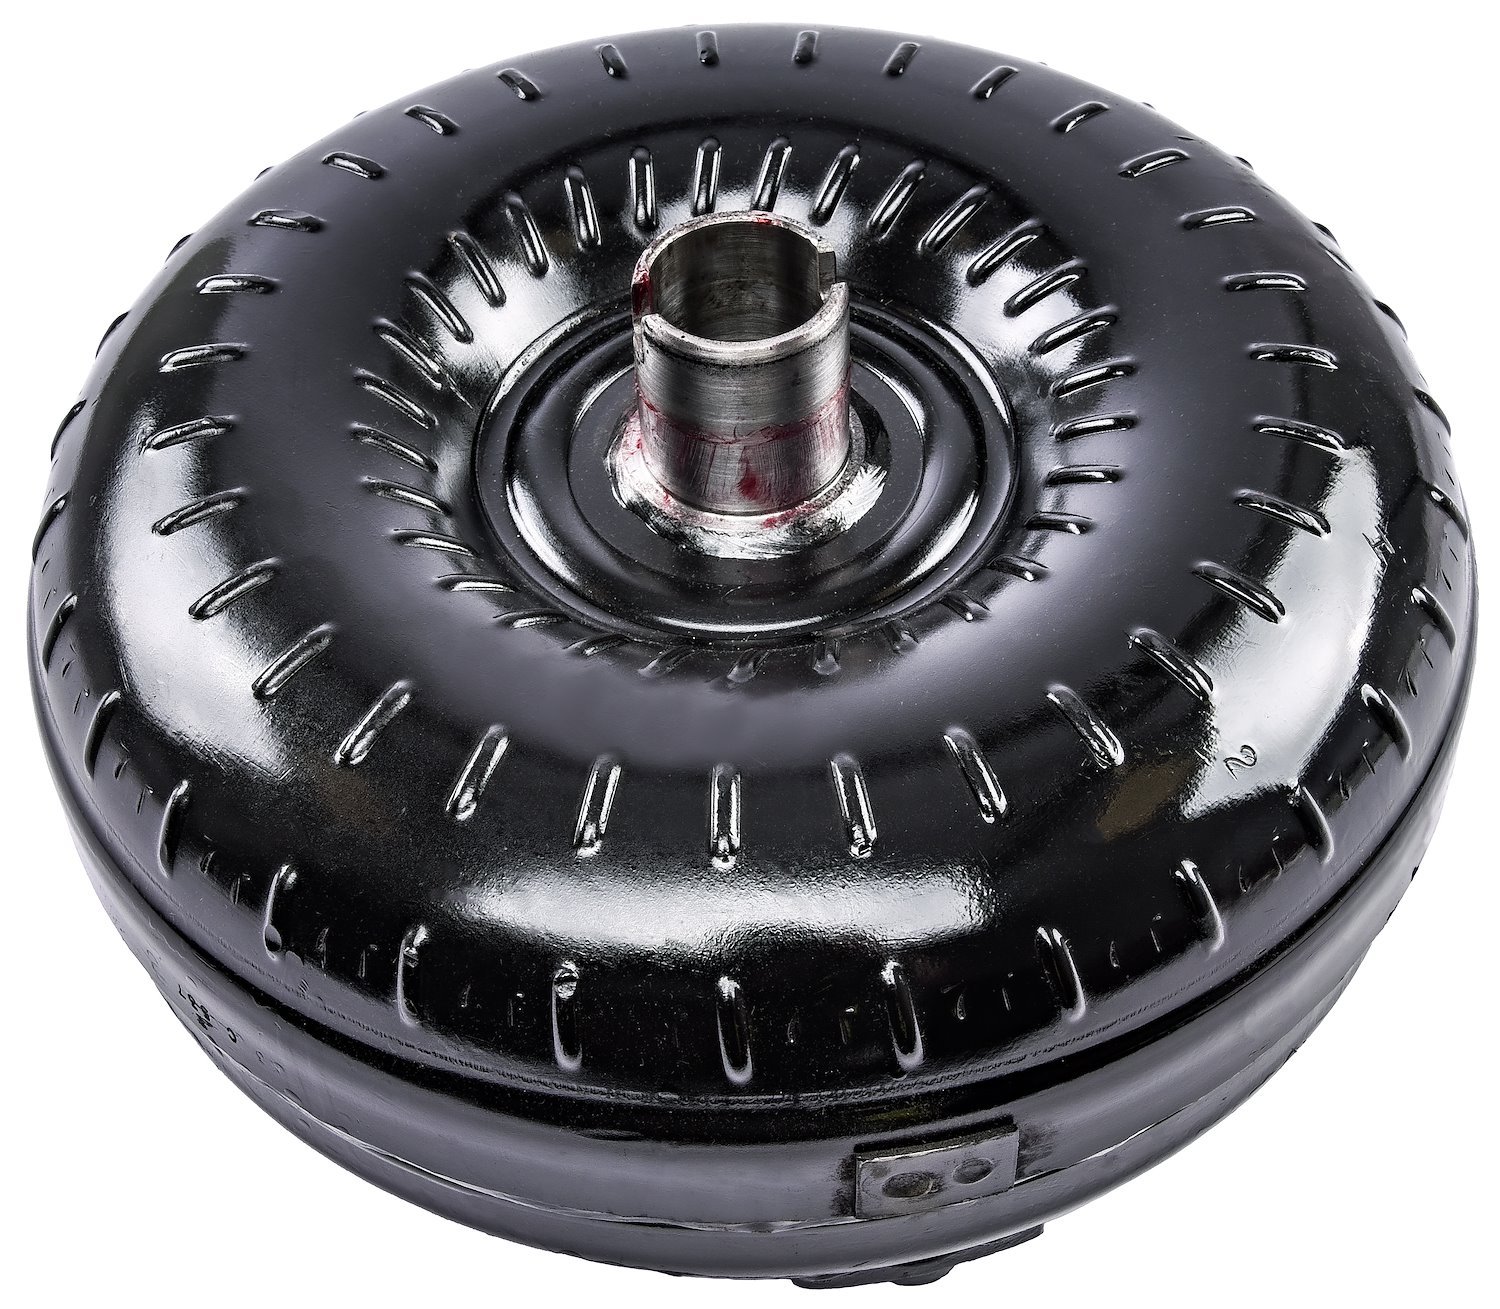 Torque Converter for GM 700R4 [2400-2800 RPM Stall Speed]